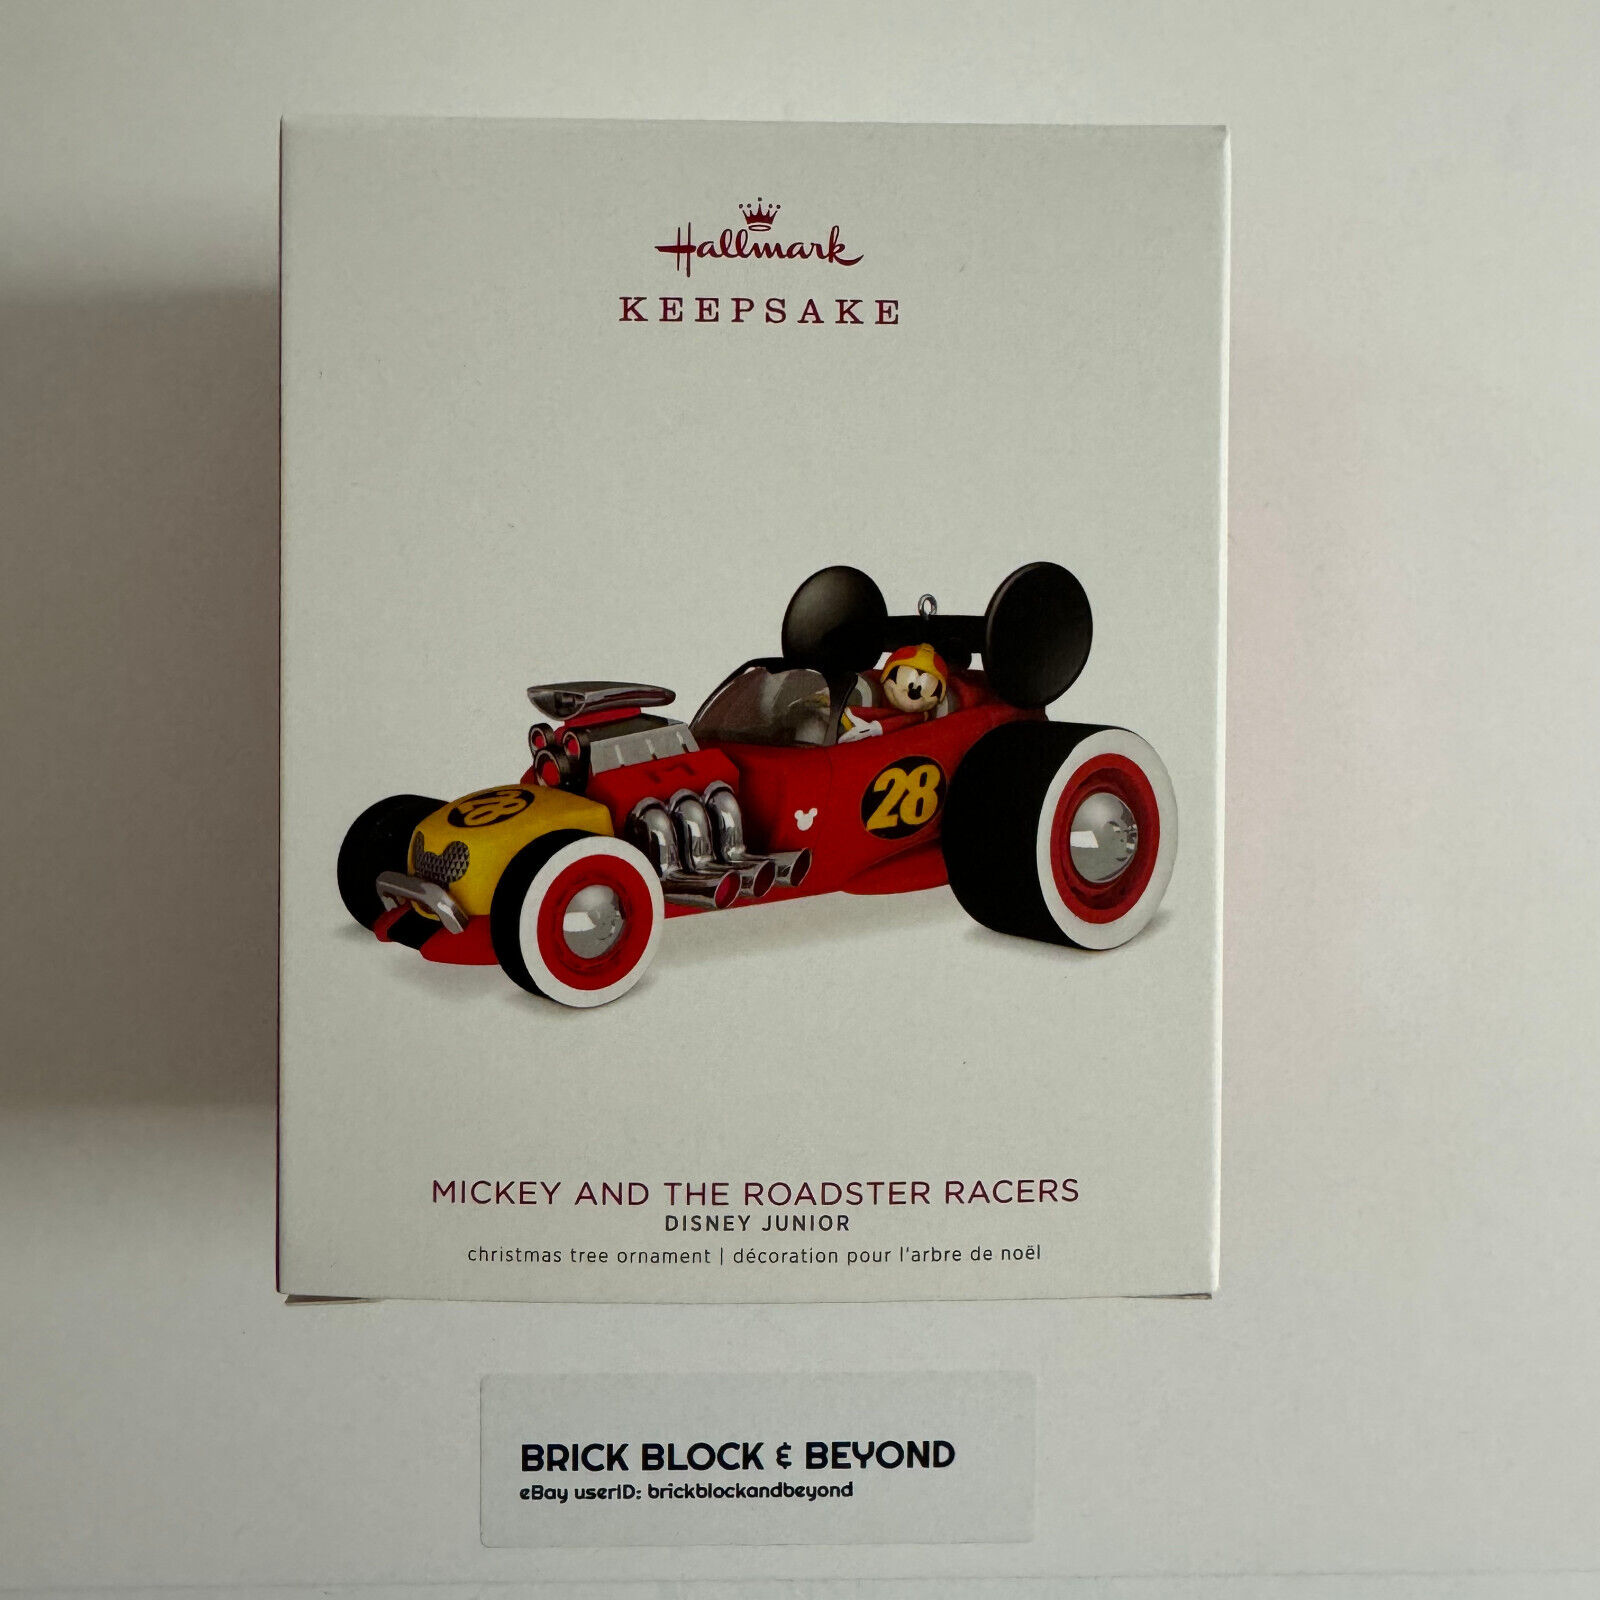 Hallmark Keepsake Ornament 2018 Mickey and the Roadster Racers New in Box